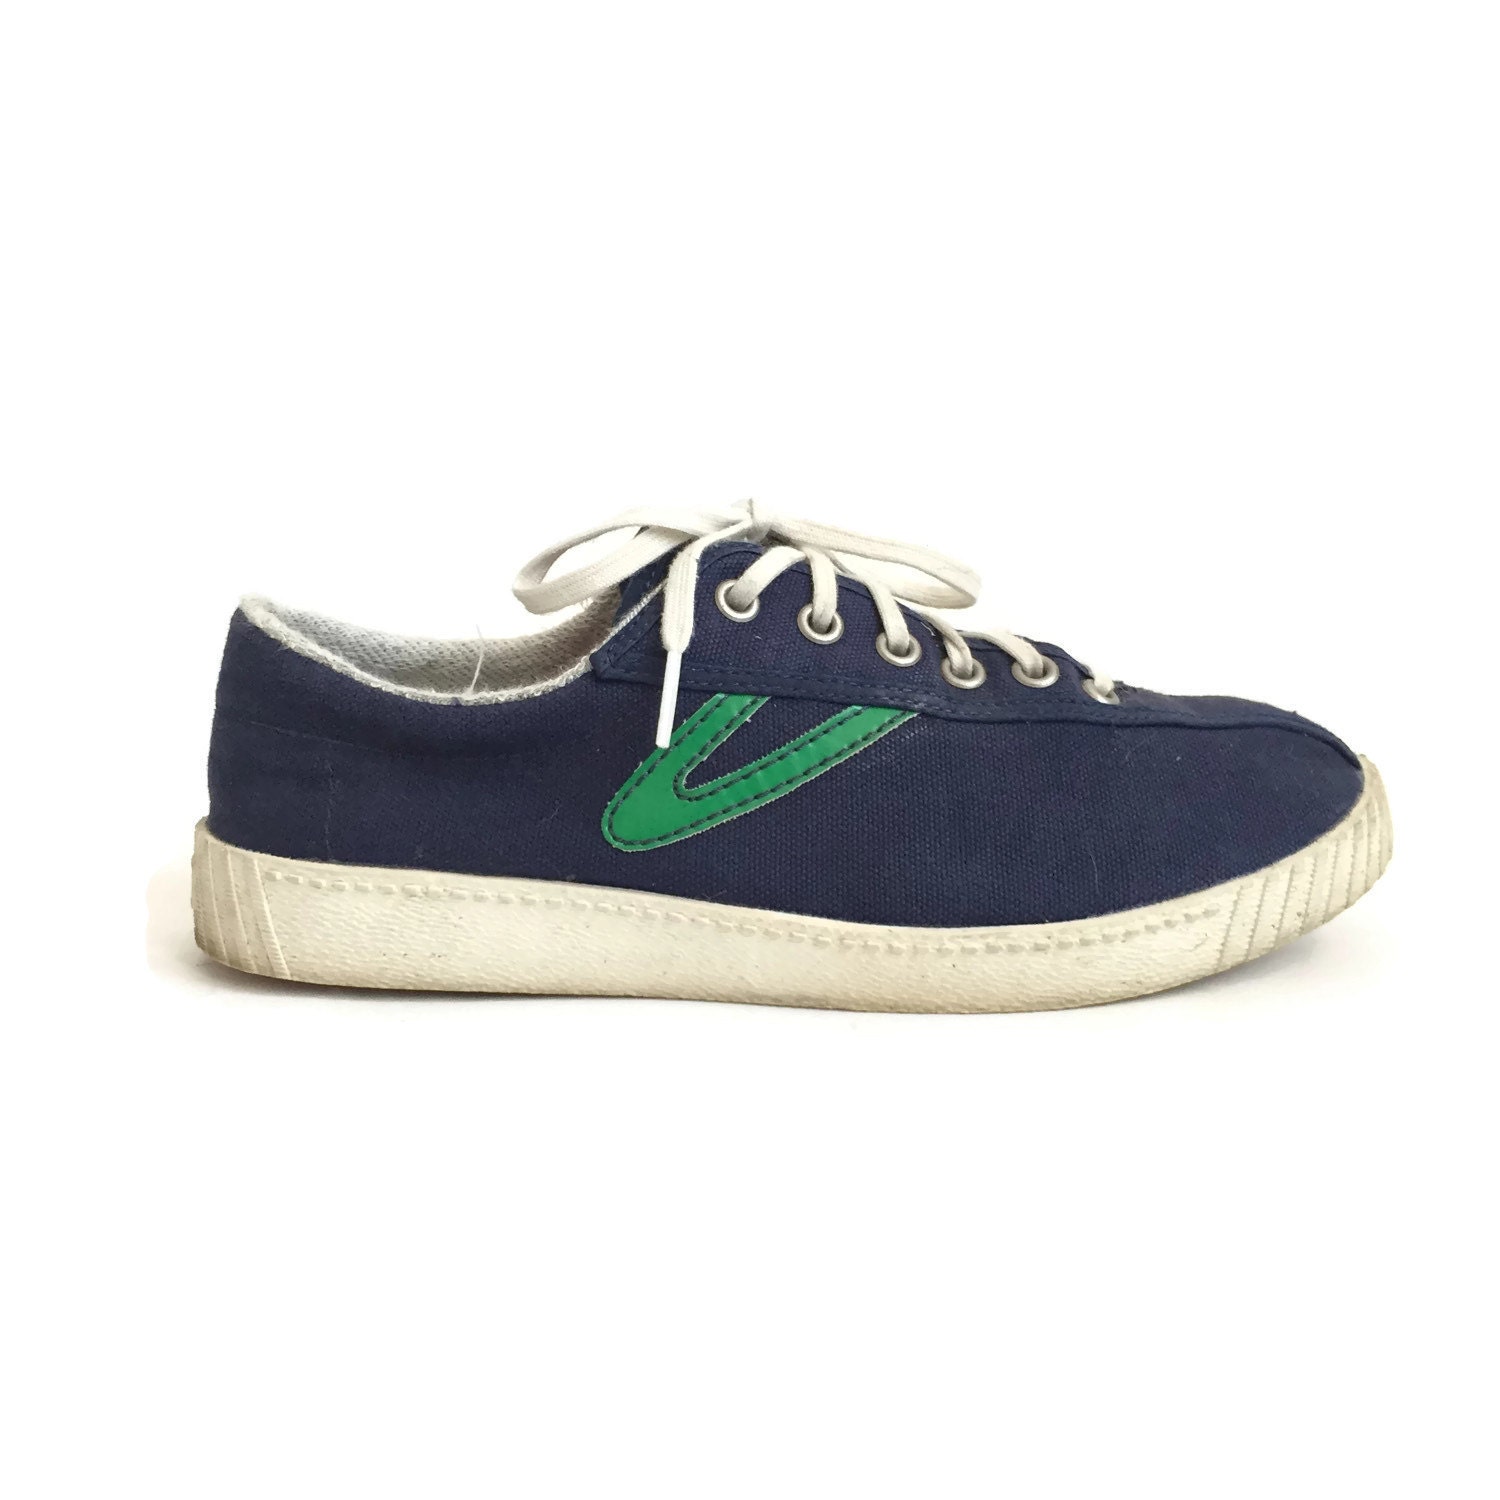 Vintage Tretorn Nylite Navy Blue and Green Sneakers size 8